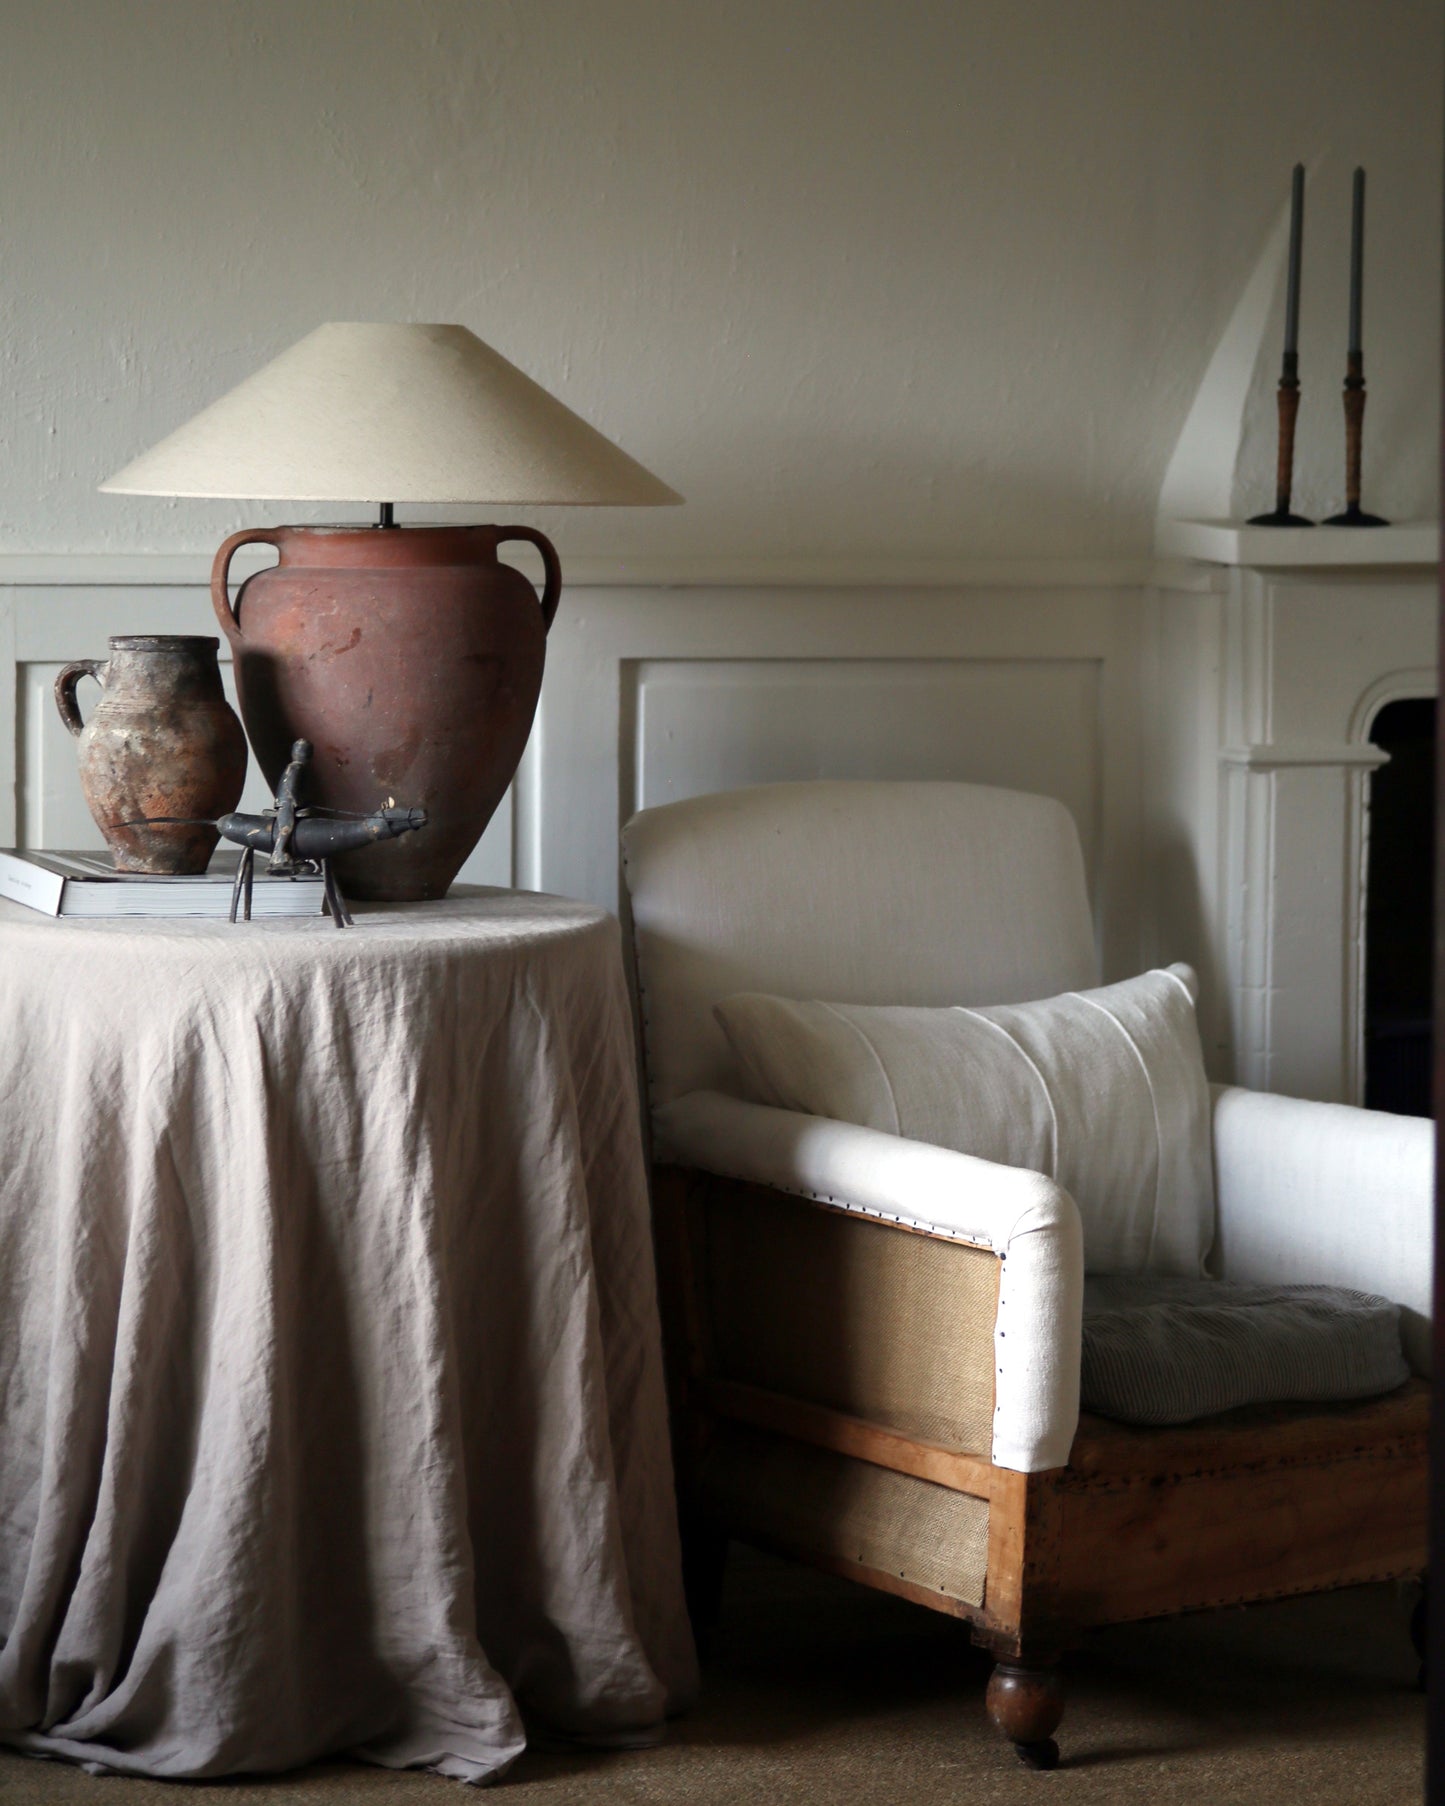 Statement antique lamp in farmhouse with antique furniture and homewares